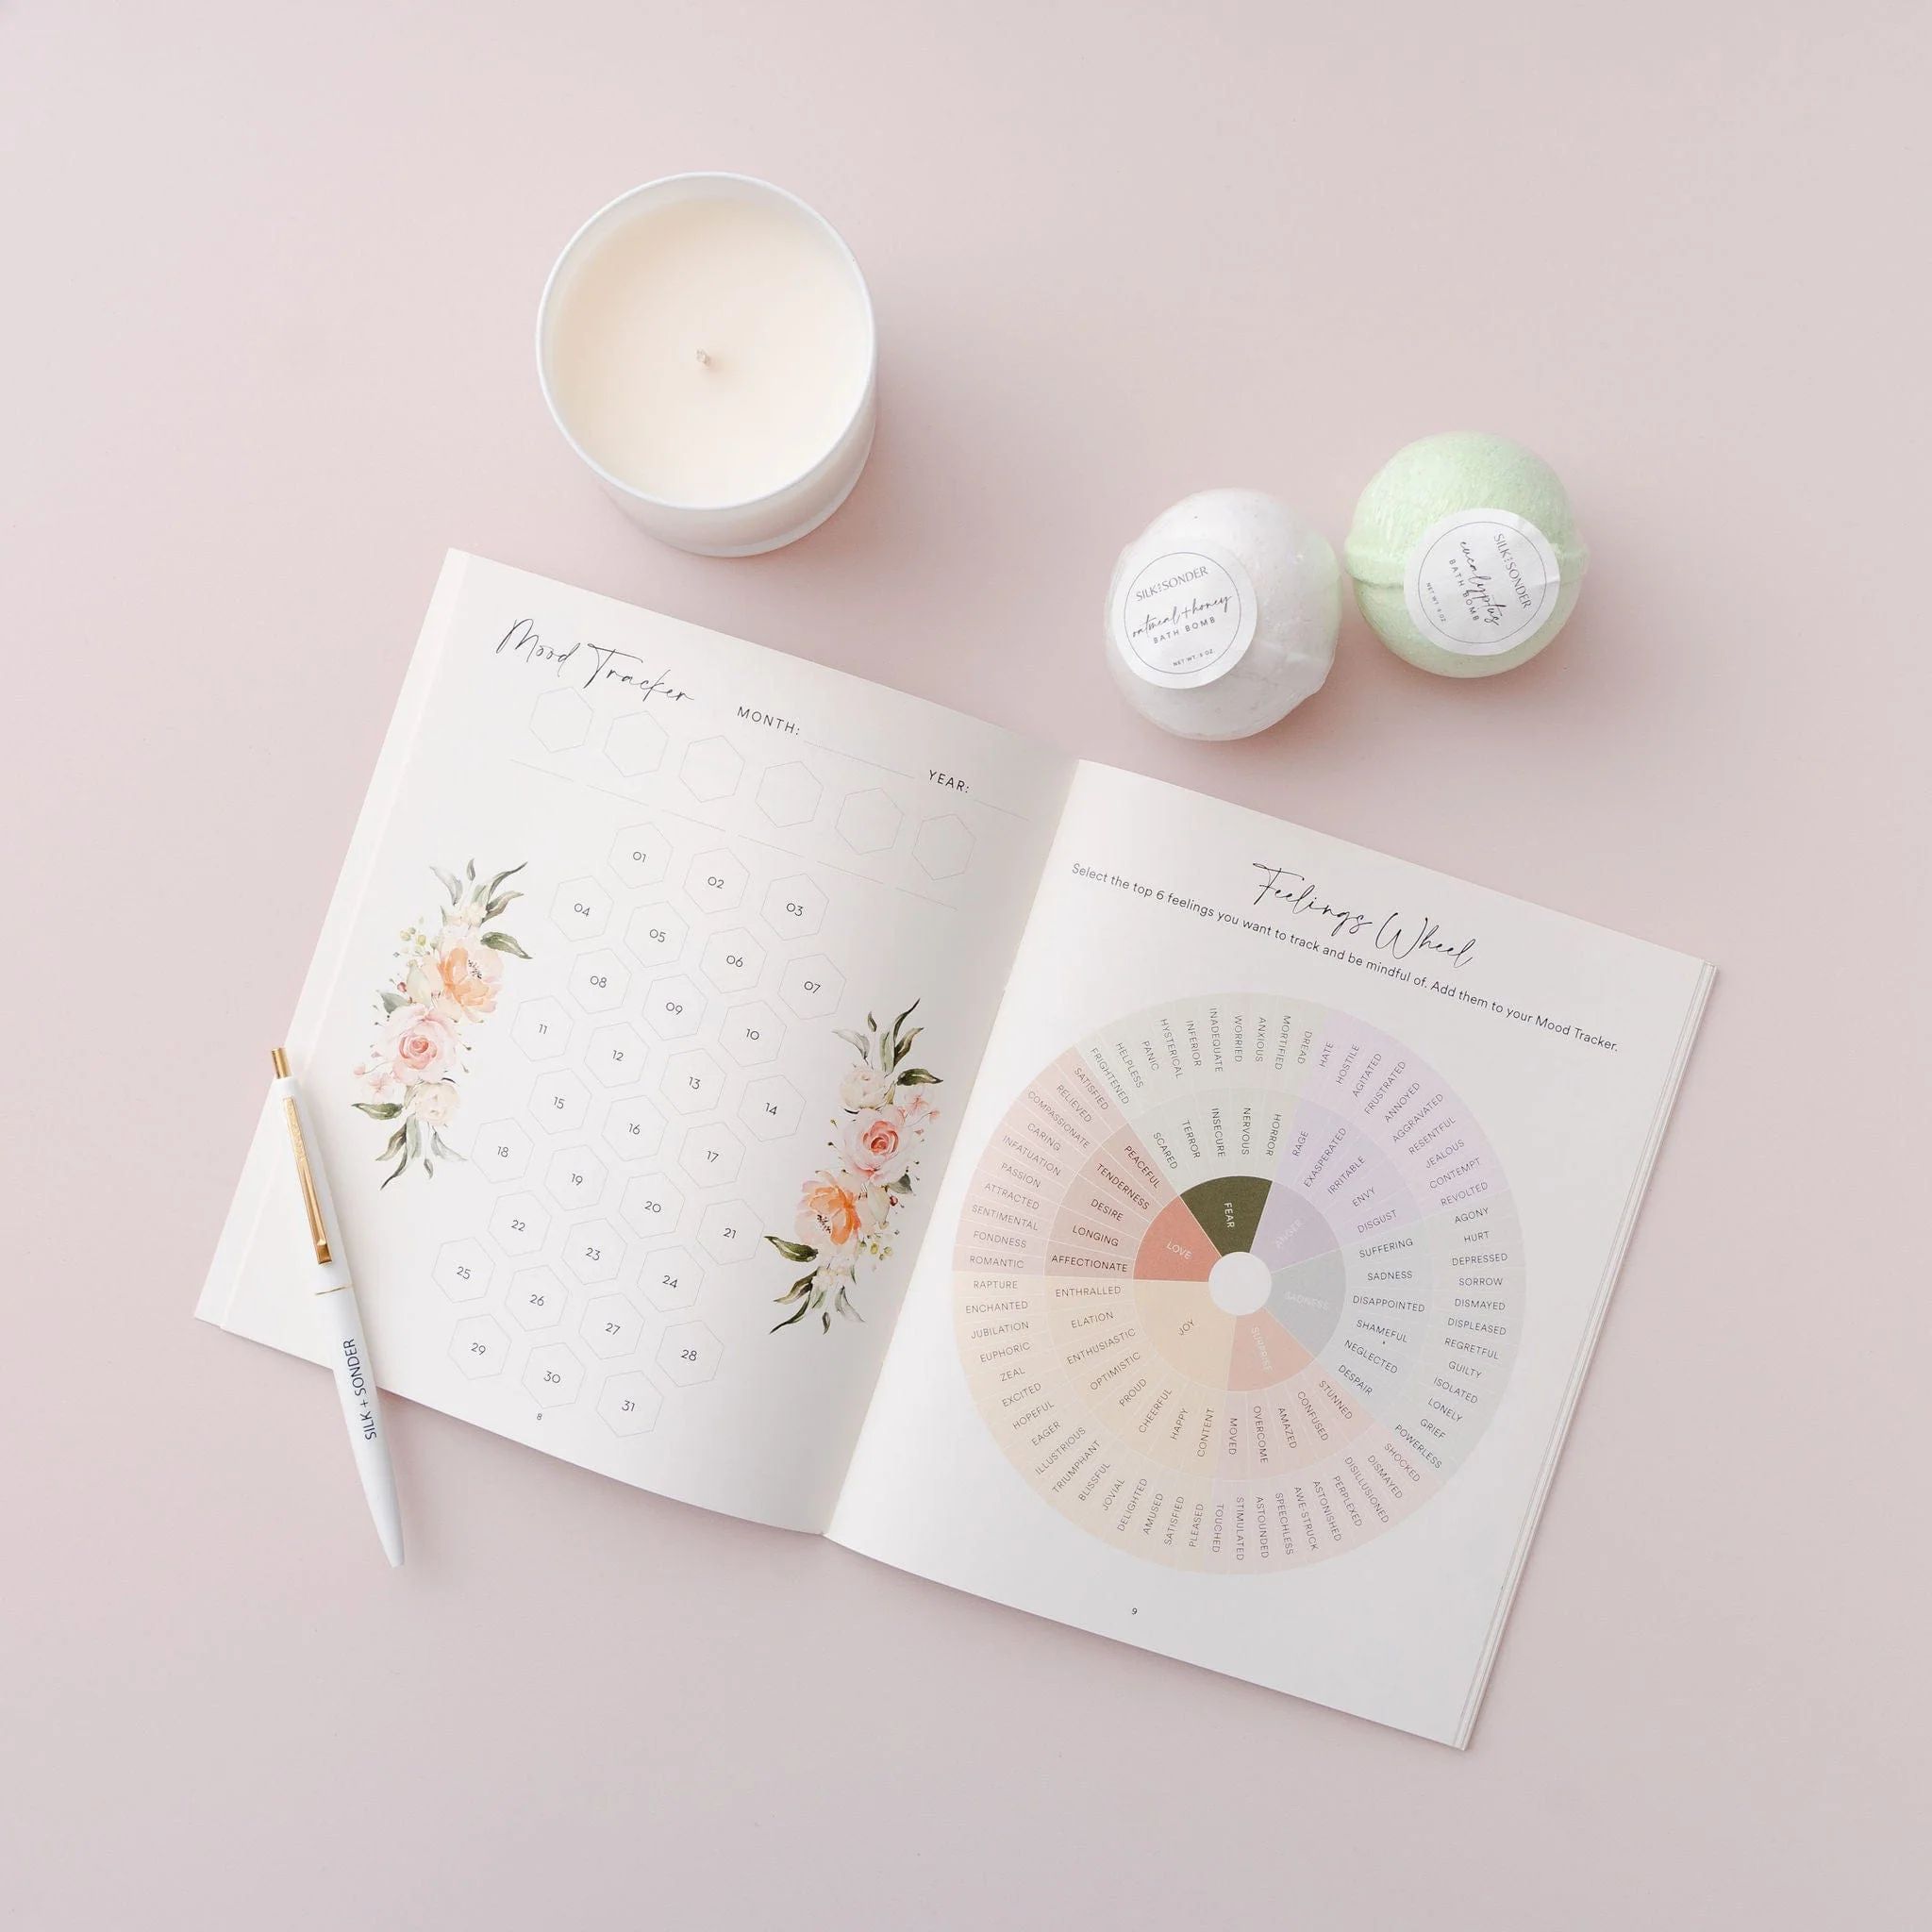 The Self-Care Gift Box | Silk and Sonder